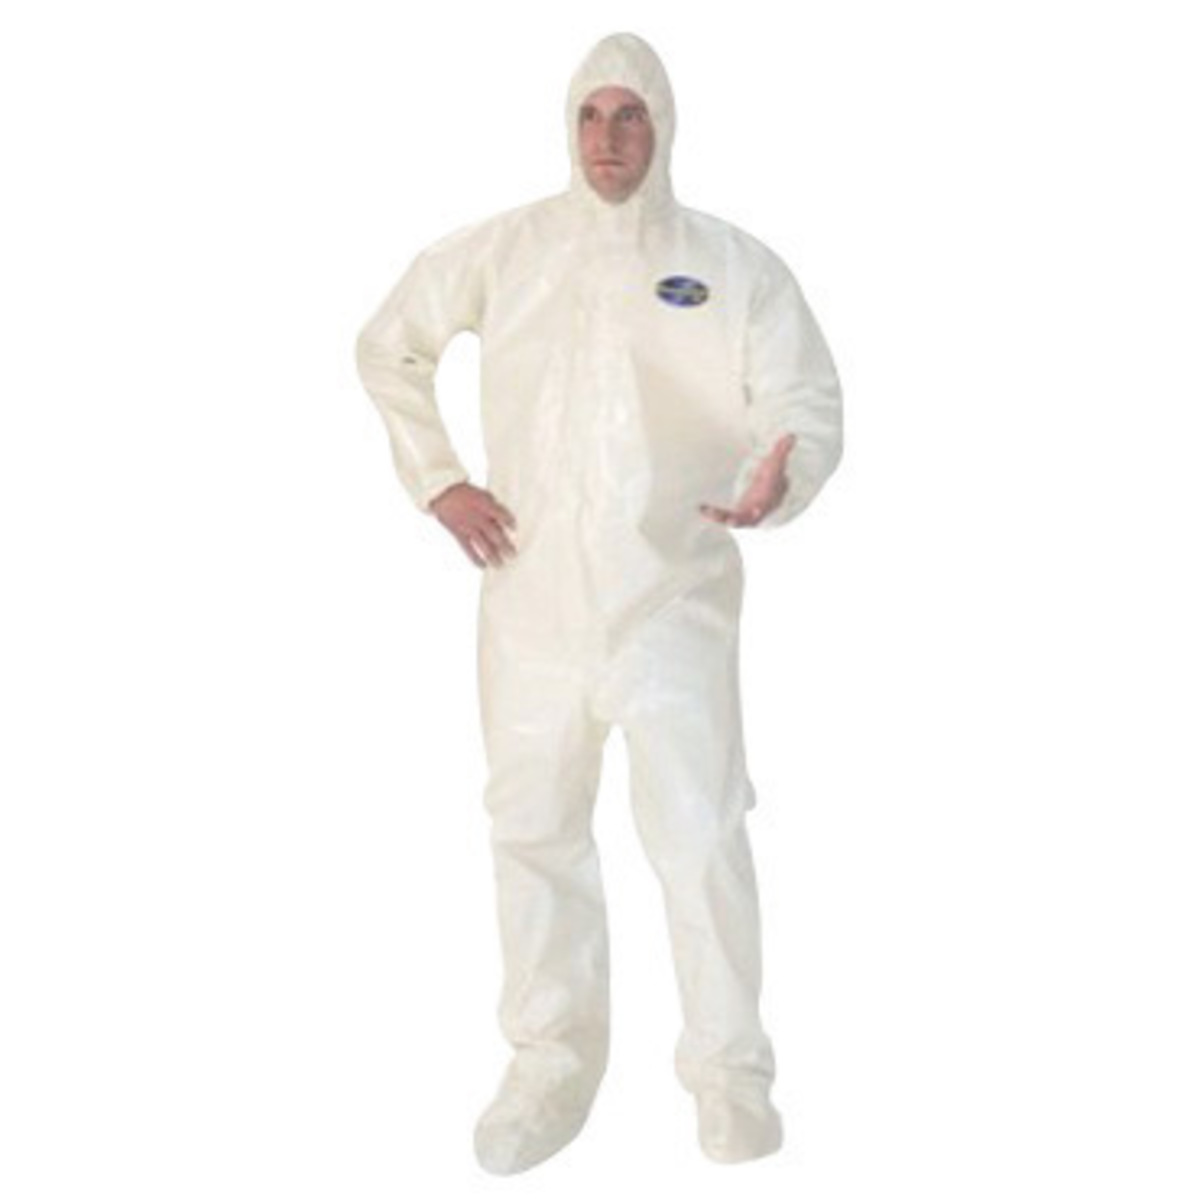 Kimberly-Clark Professional* Large White KleenGuard* A80 Saranex® 23-P Film Laminate Coveralls With Storm Flap Over Front Zipper